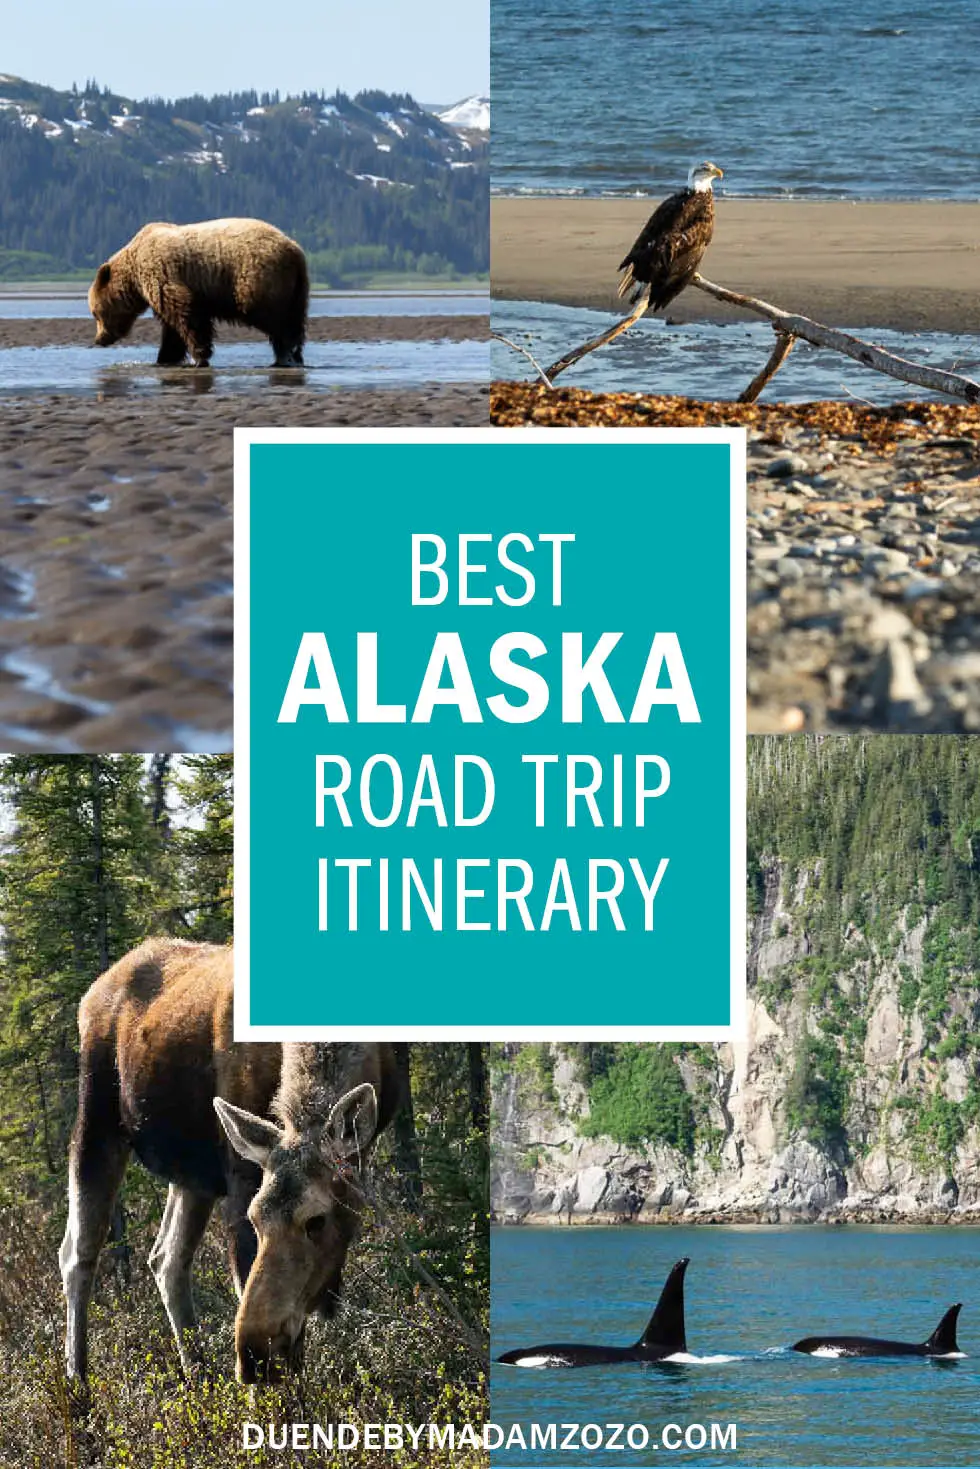 Images of a brown bear, bald eagle, moose and orcas with title "Best Alaska Road Trip Itinerary"